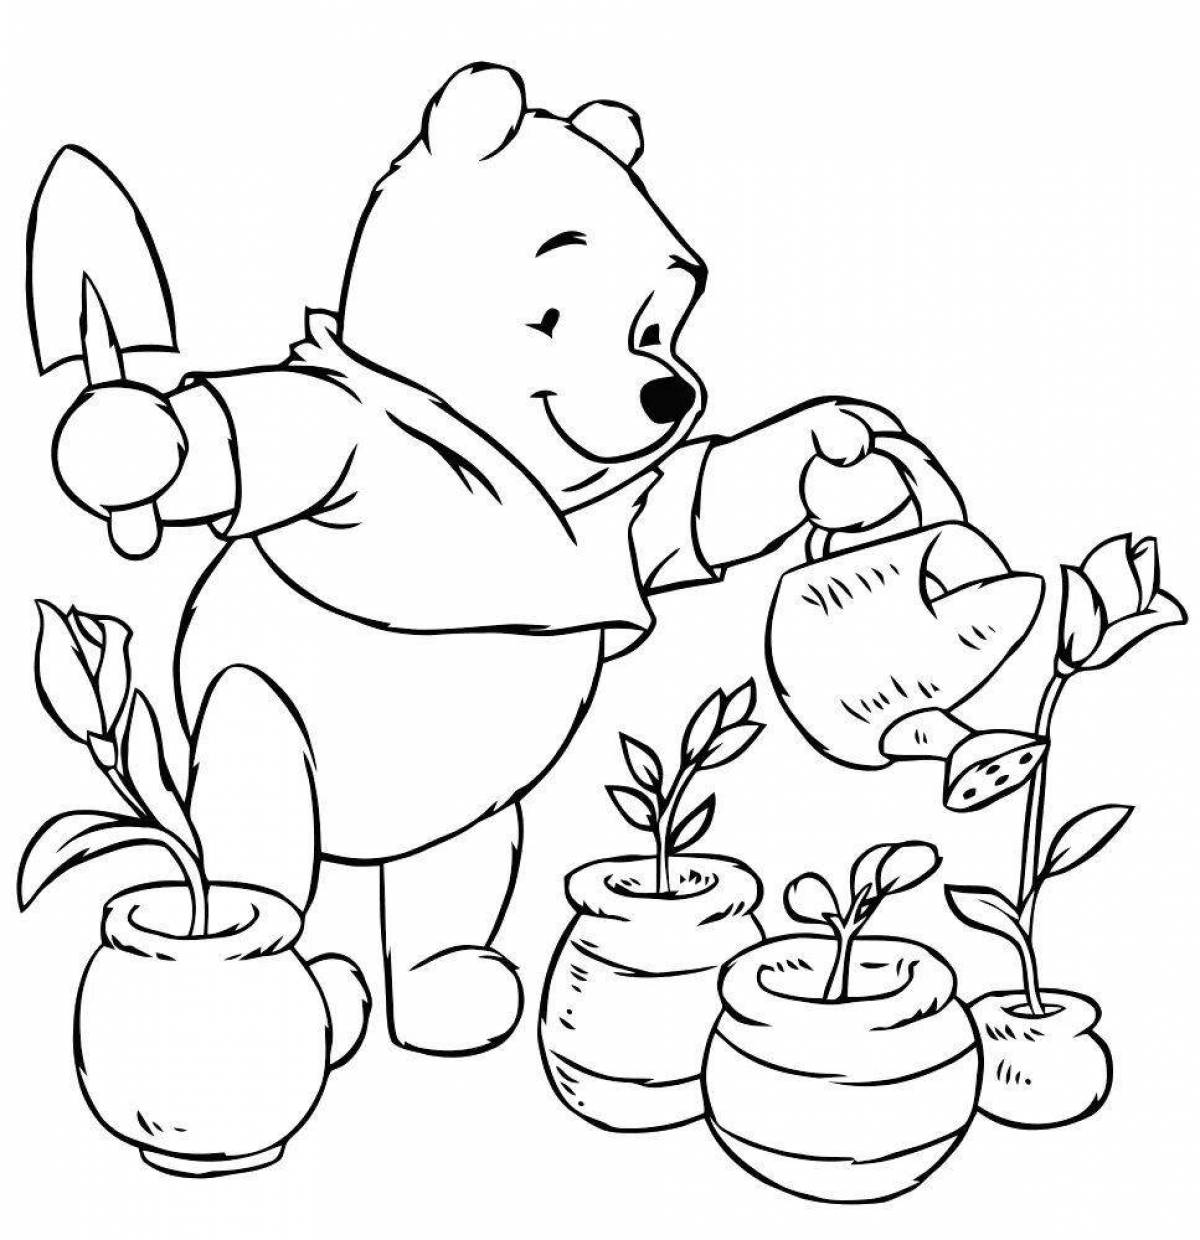 Coloring-journey coloring page com